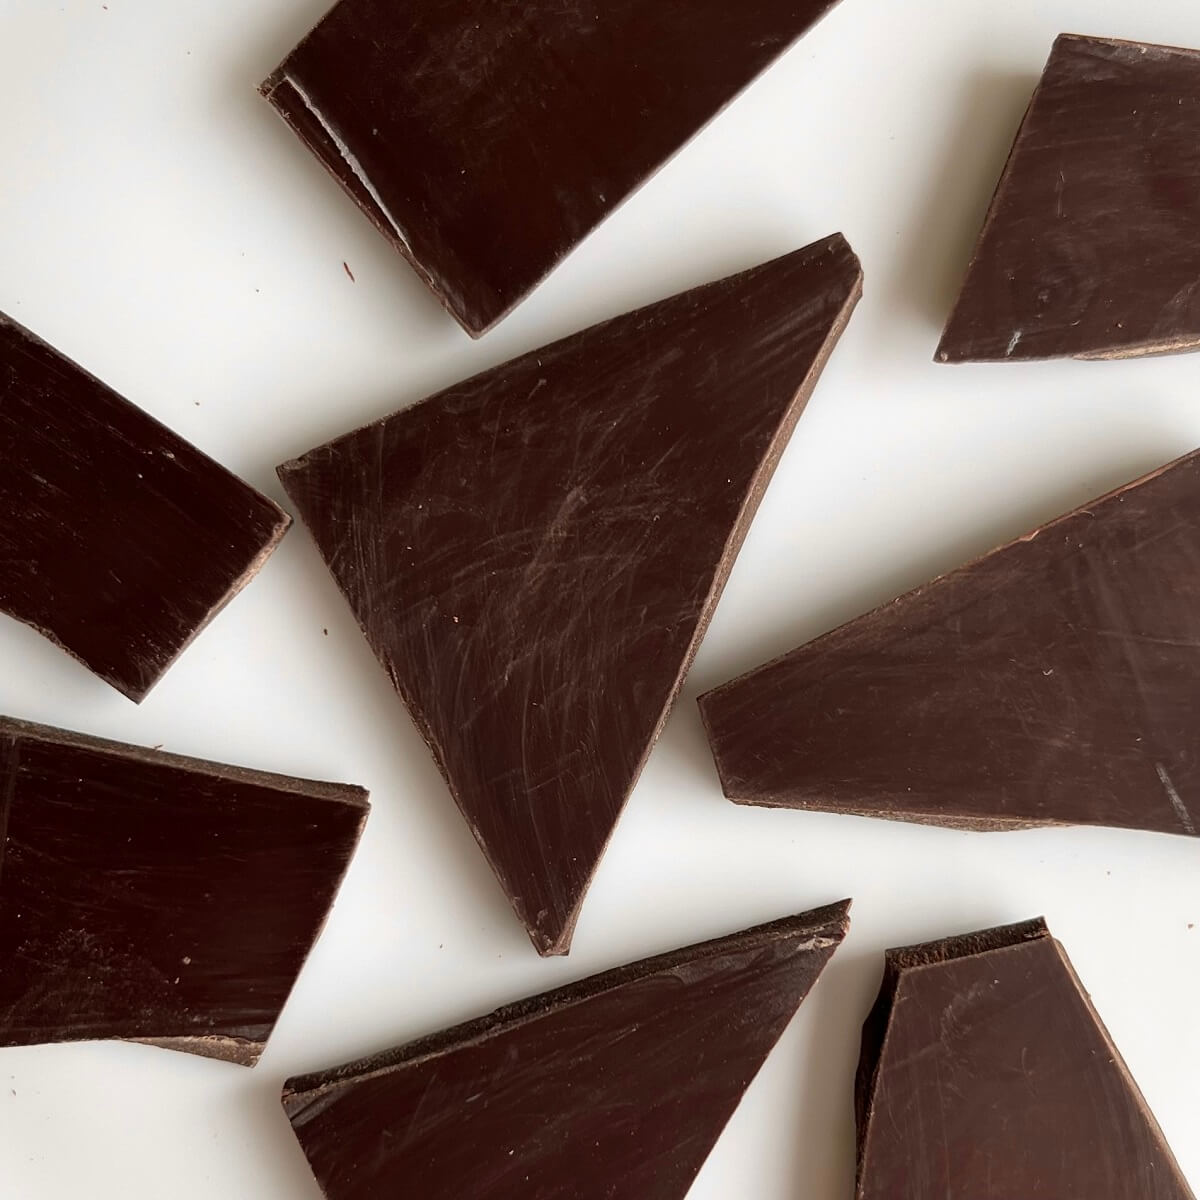 Shards of dark chocolate on a white plate.